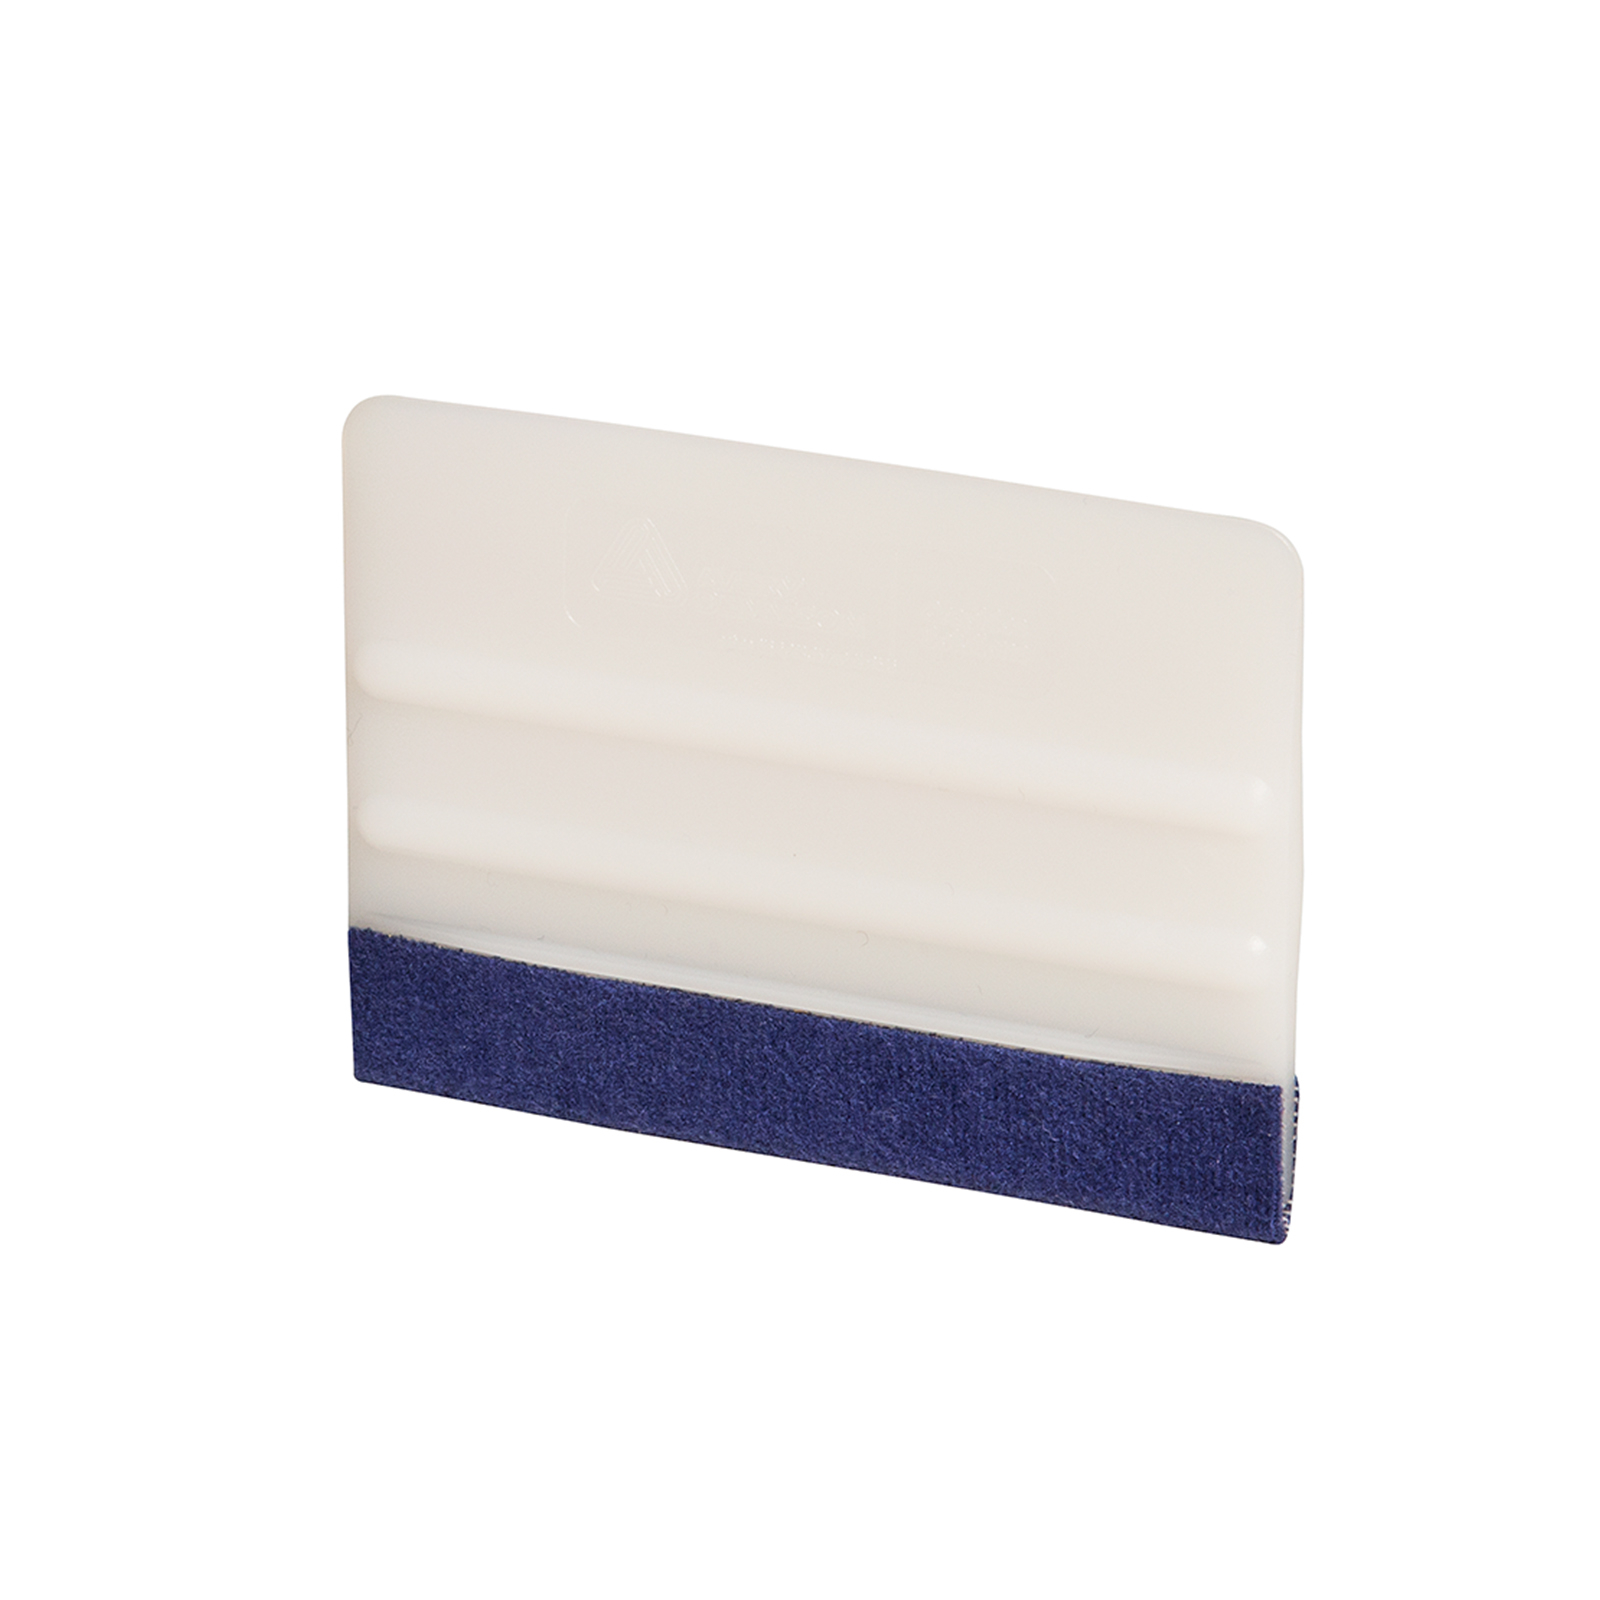 Avery 4'' x 3'' White Squeegee, Hard Hardness, with Blue Felt for Vinyl and Film Application